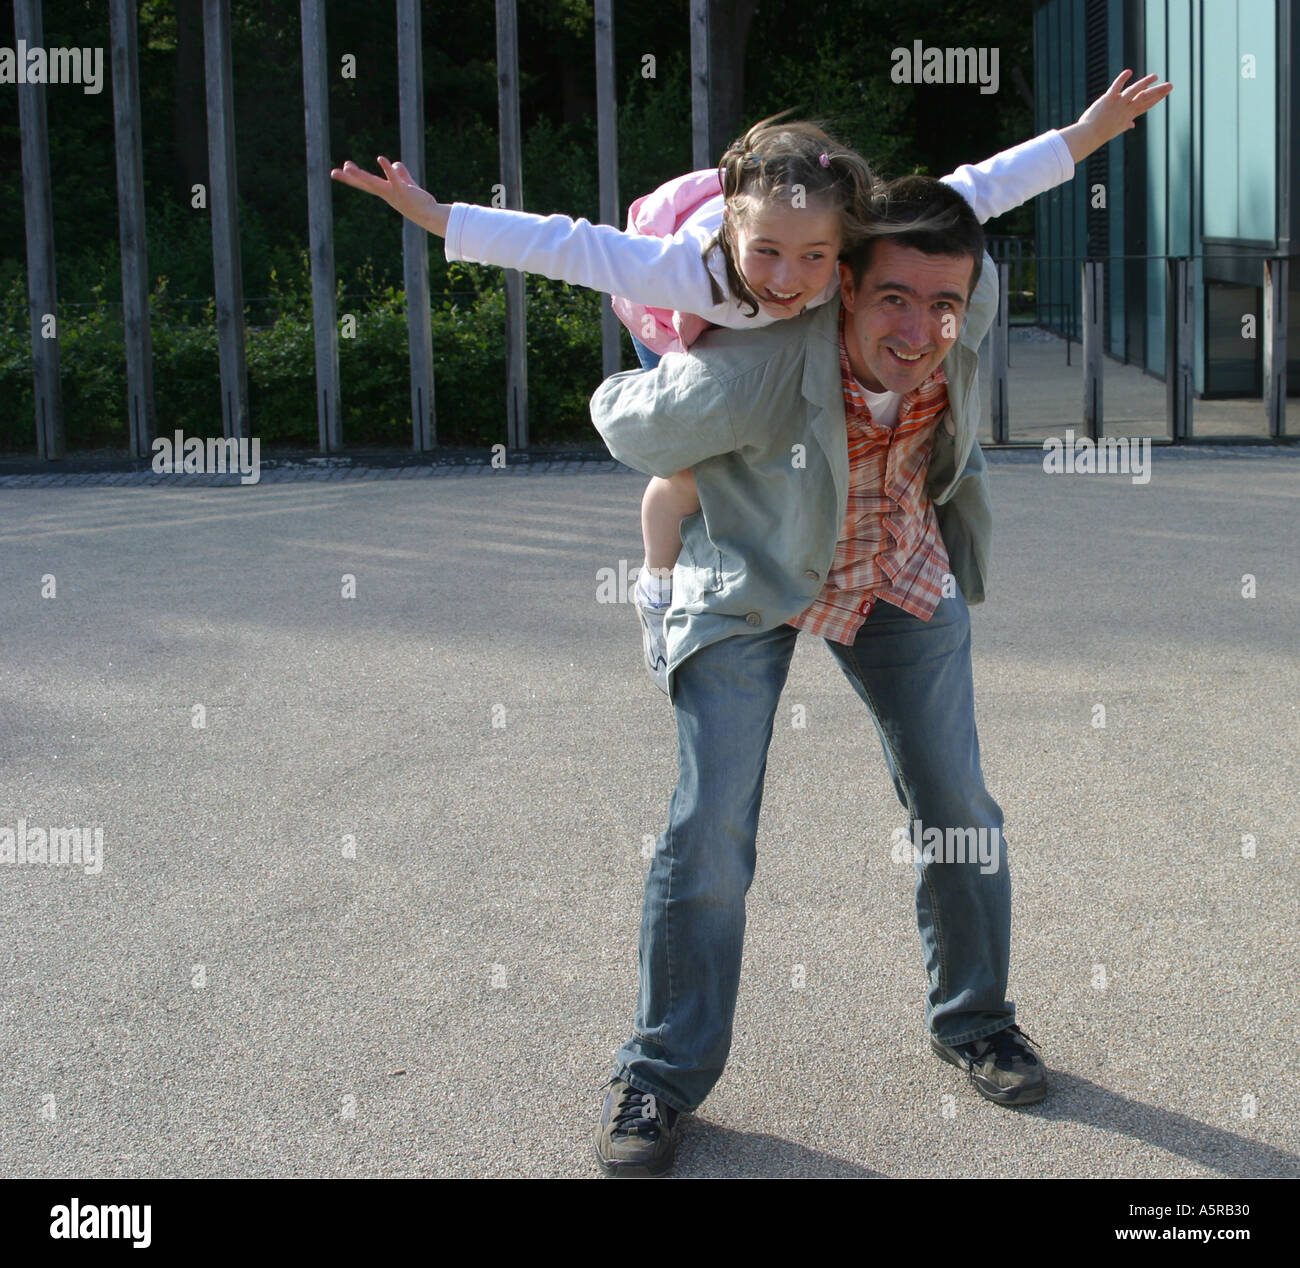 Young girl playing on her Dads shoulders Stock Photo